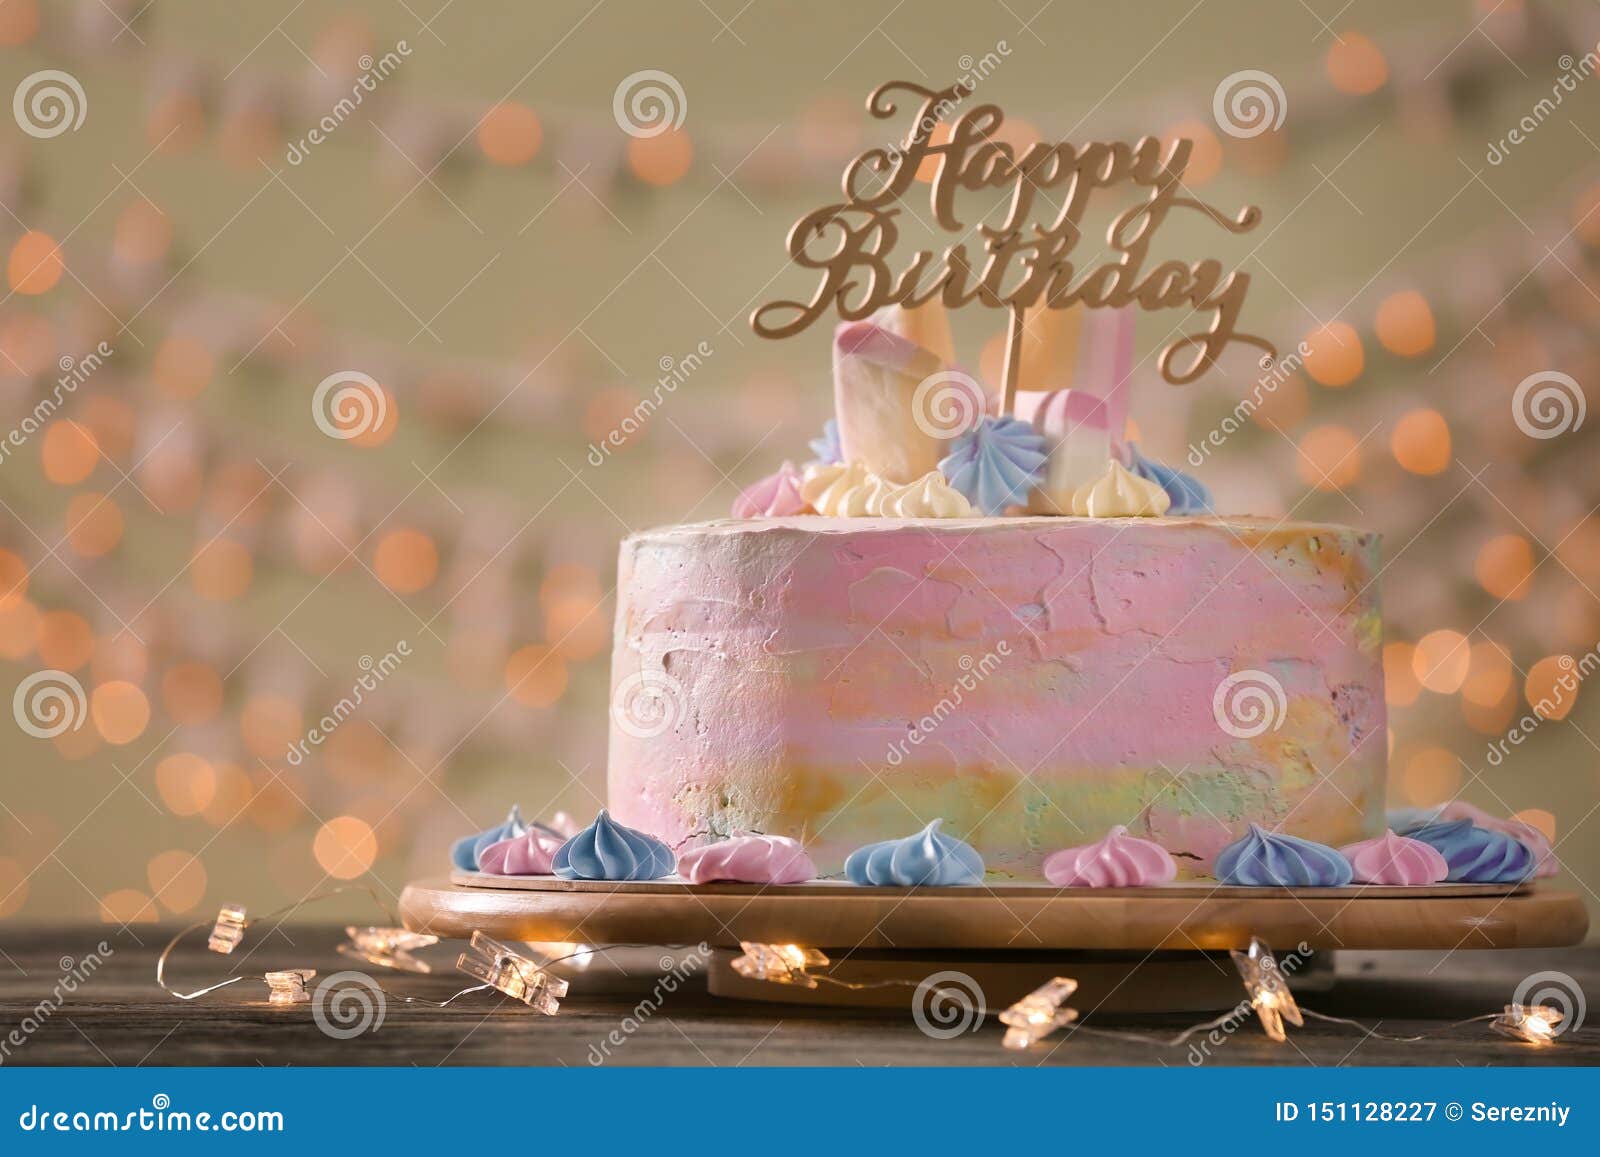 Plate with Delicious Birthday Cake on Table Against Blurred Background  Stock Image - Image of delicious, greeting: 151128227